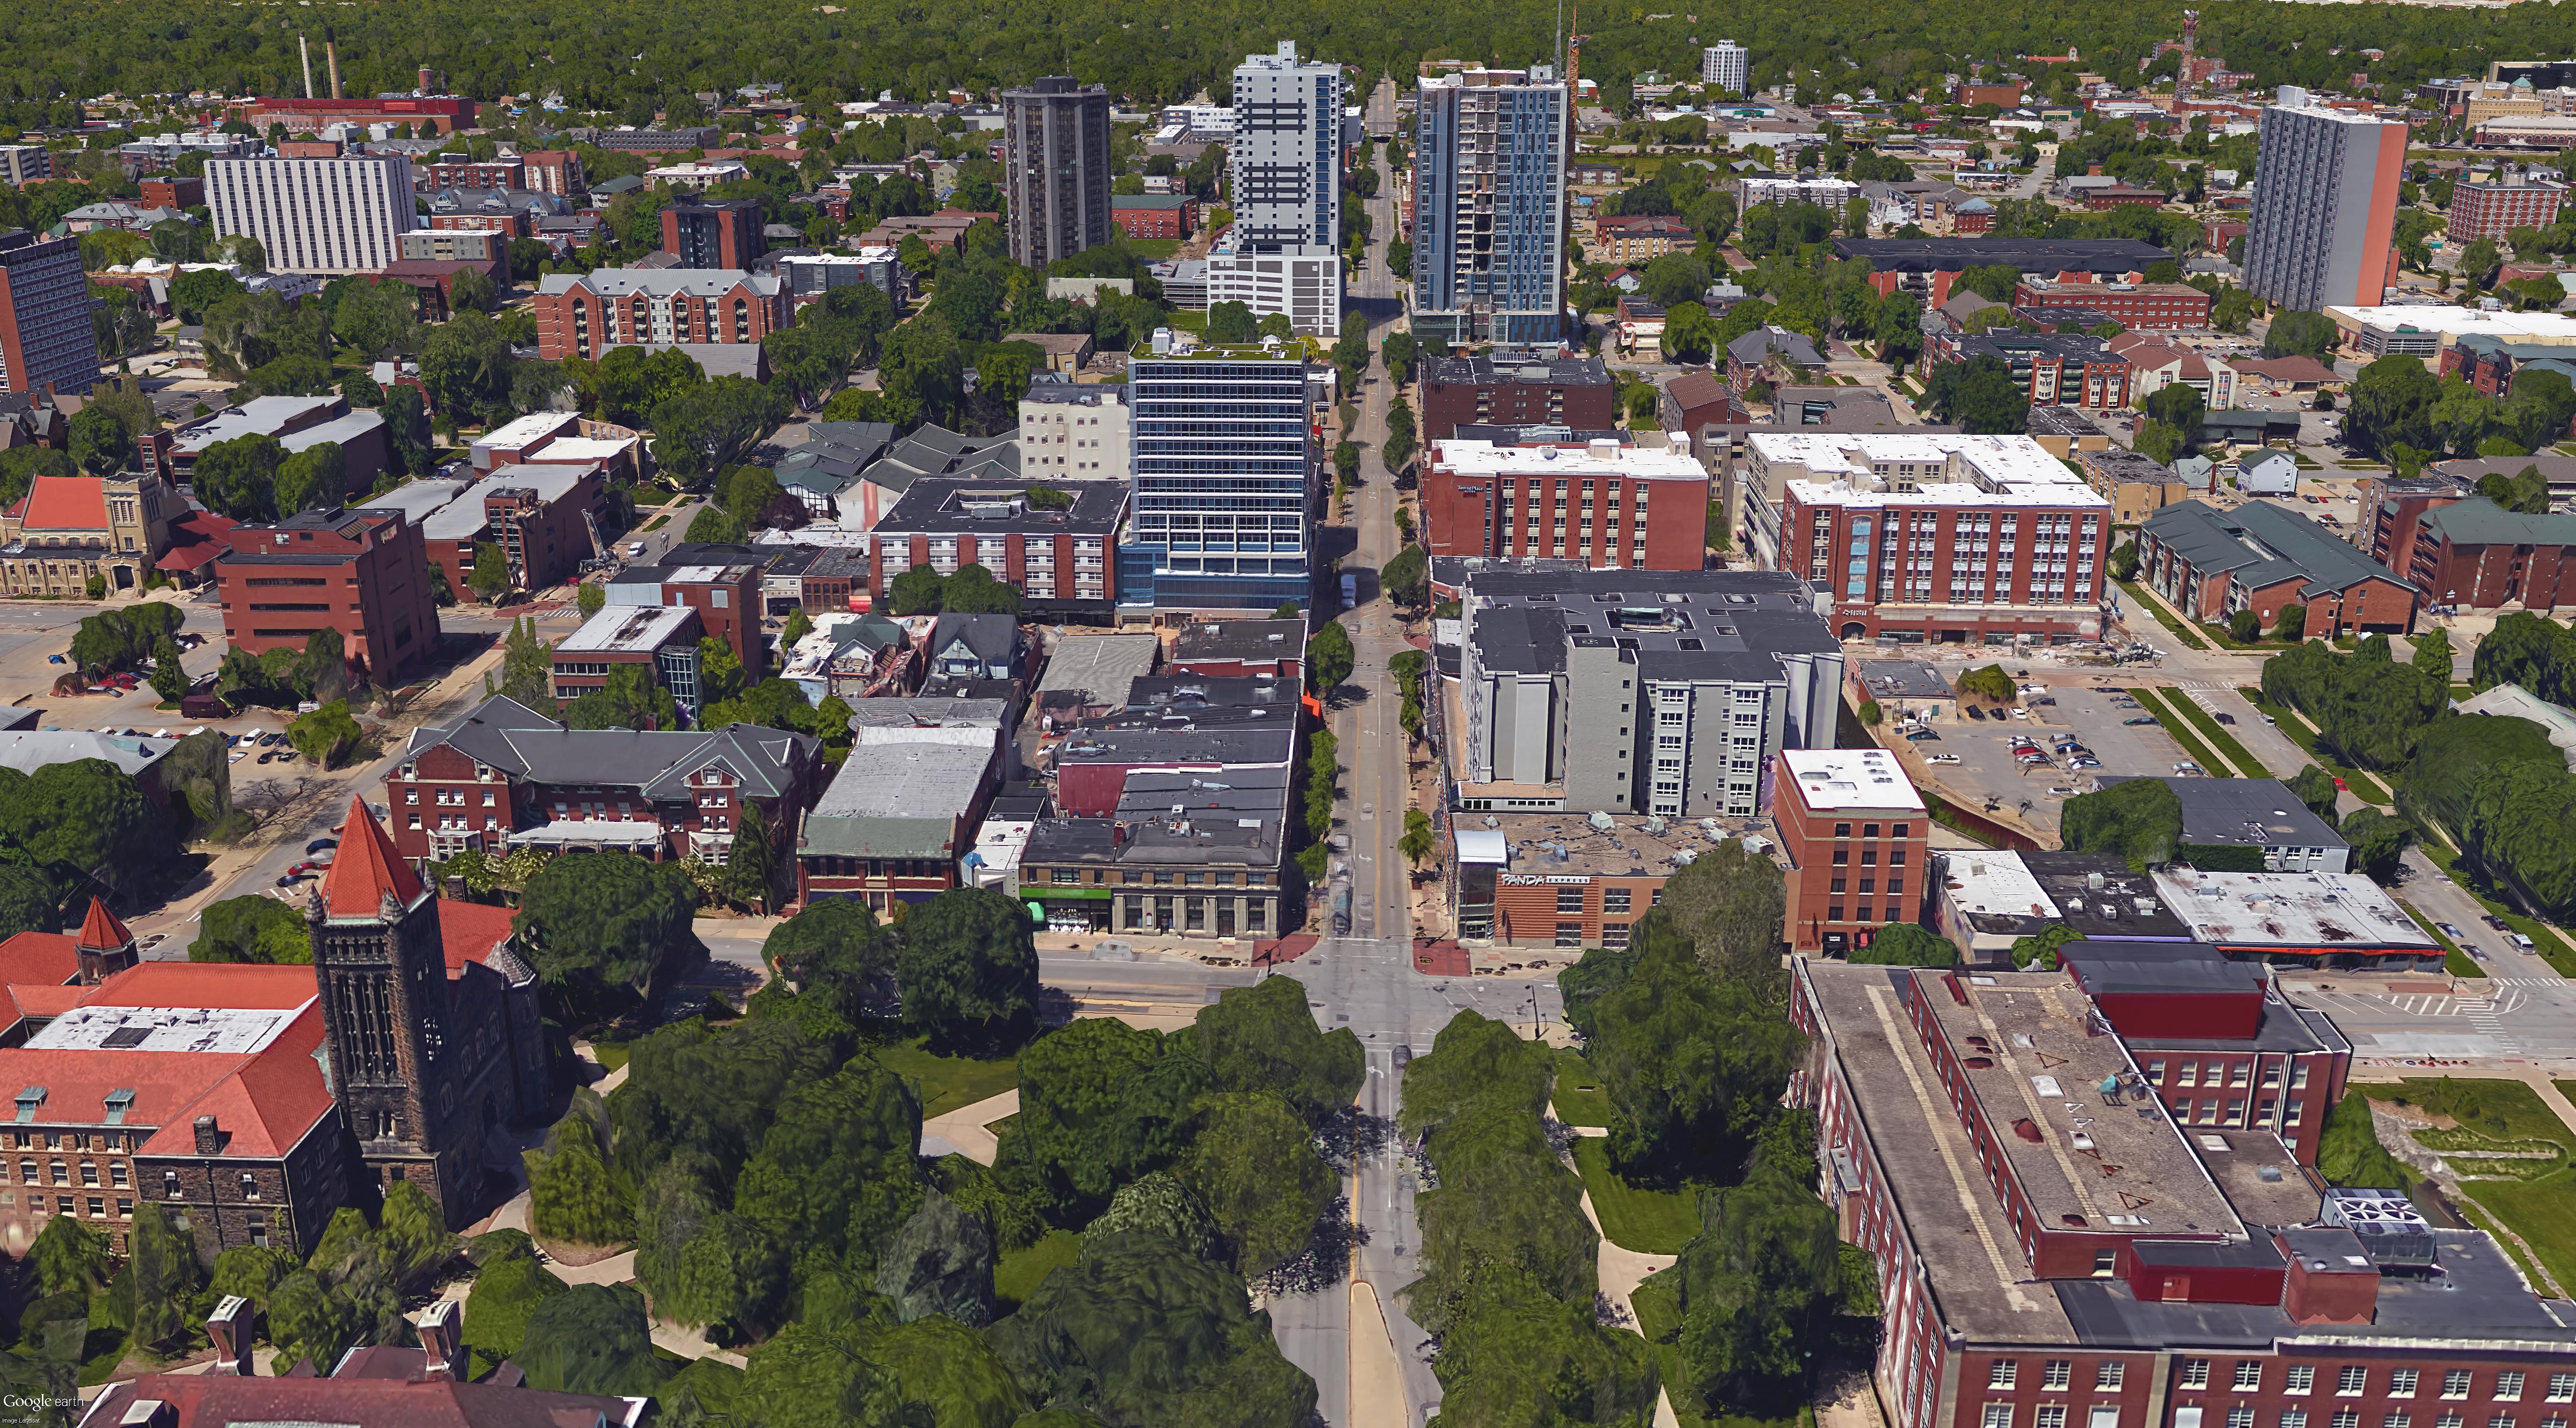 overhead view of campus buildings with intersecting roads